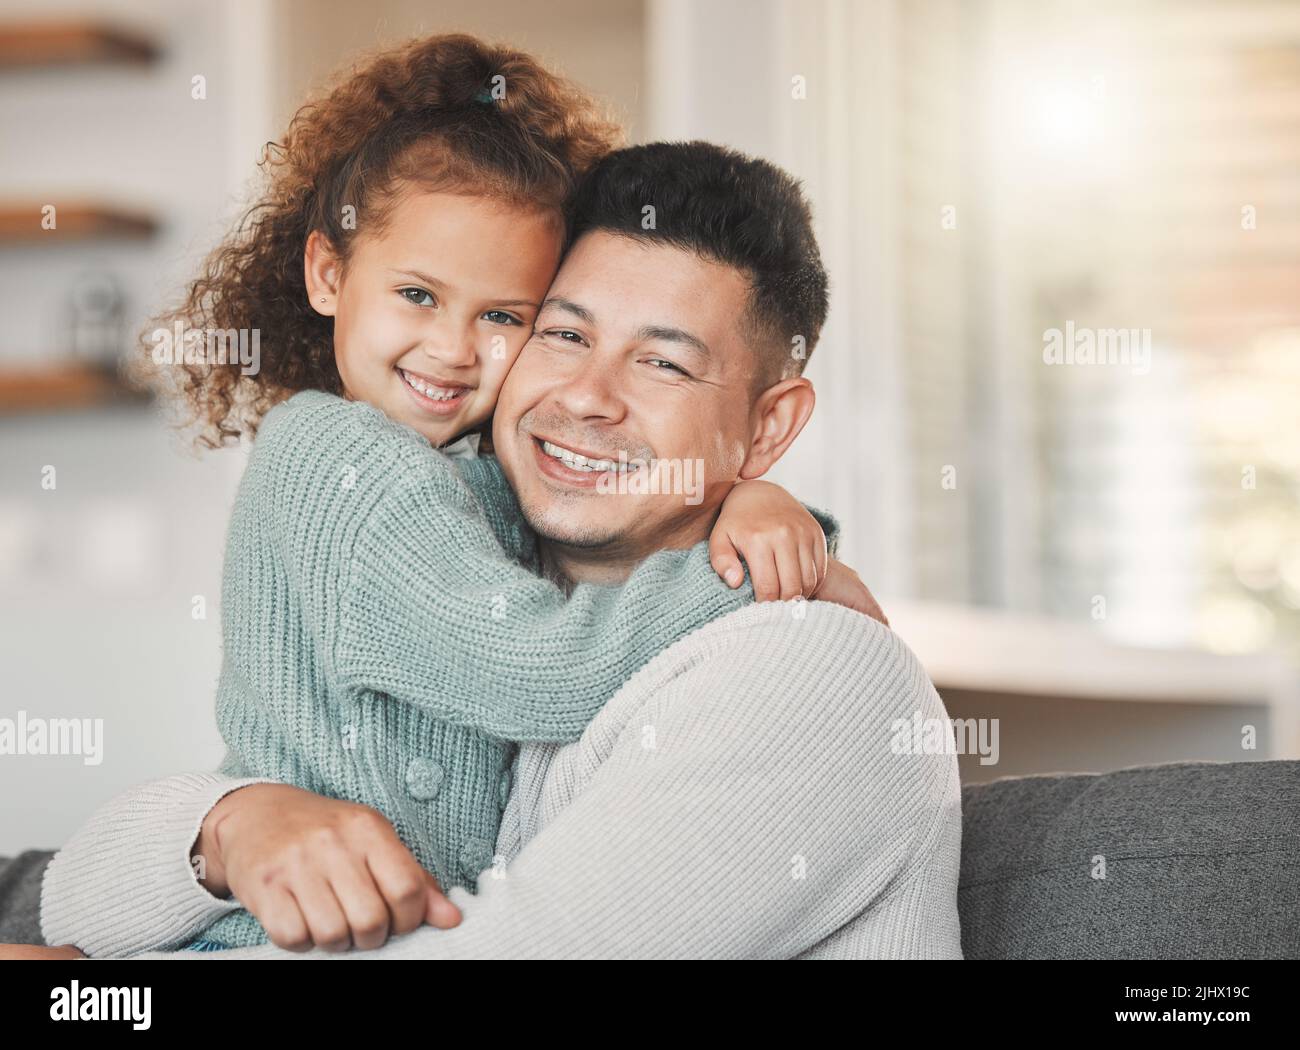 Family and friends are hidden treasures. a father and daughter on the sofa at home. Stock Photo